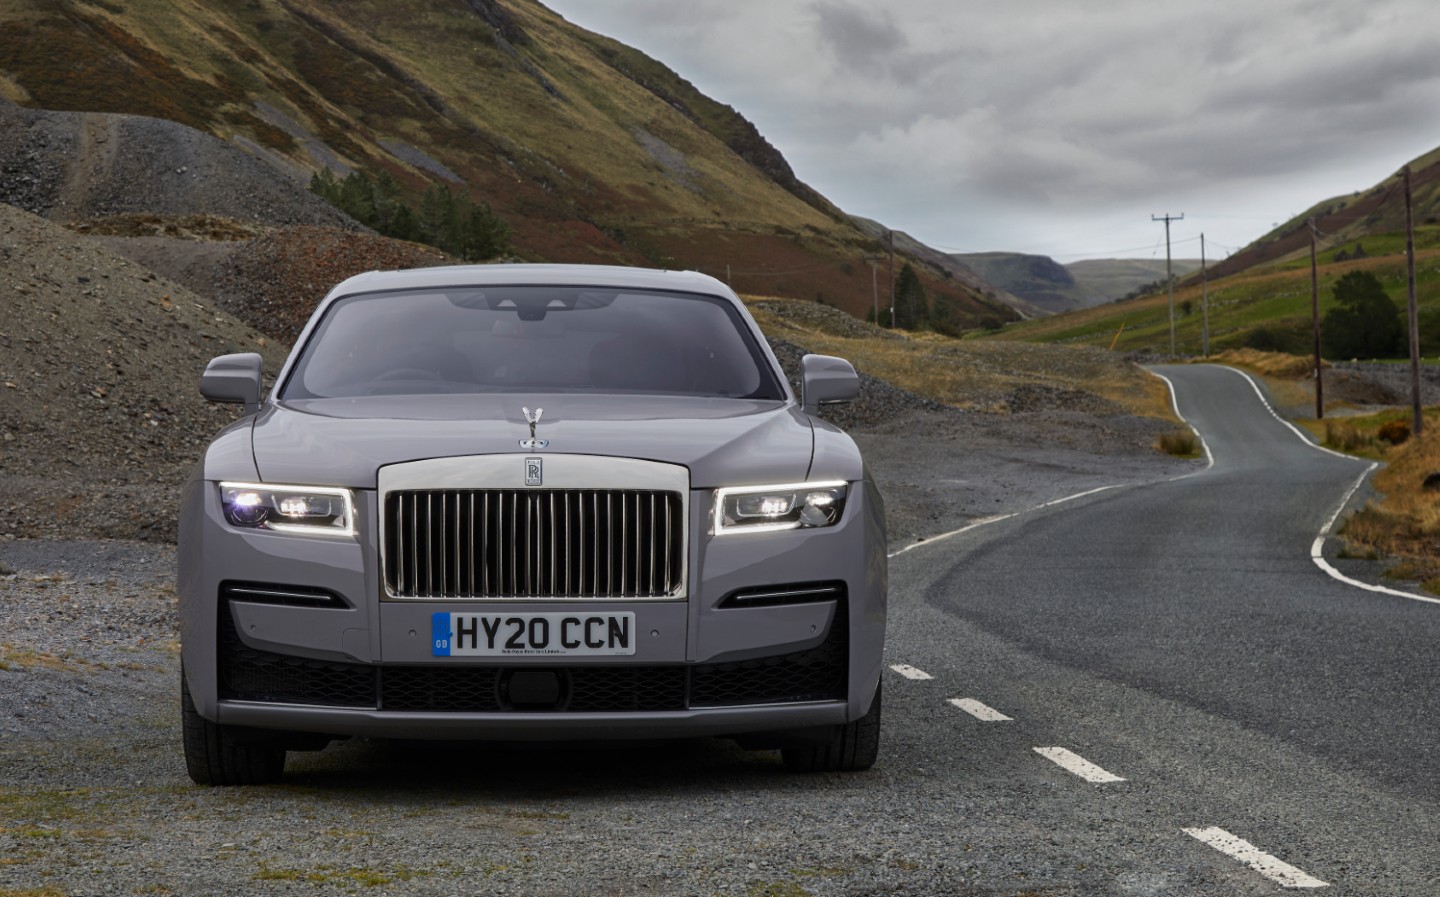 Video The new RollsRoyce Ghost goes on its first drive